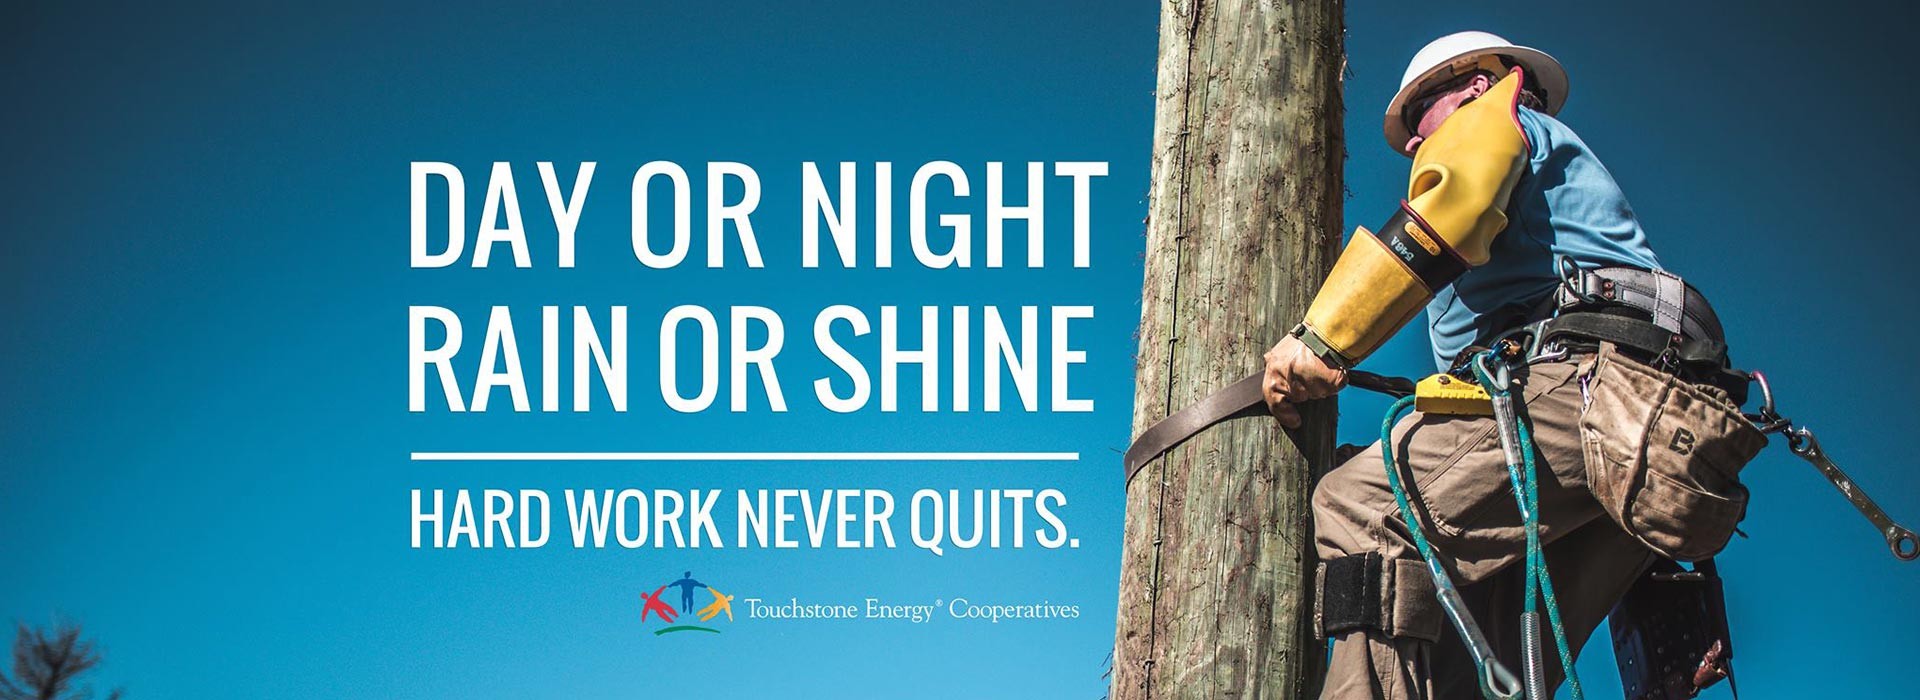 Day or night, rain or shine, hard work never quits. (Man working on power pole)